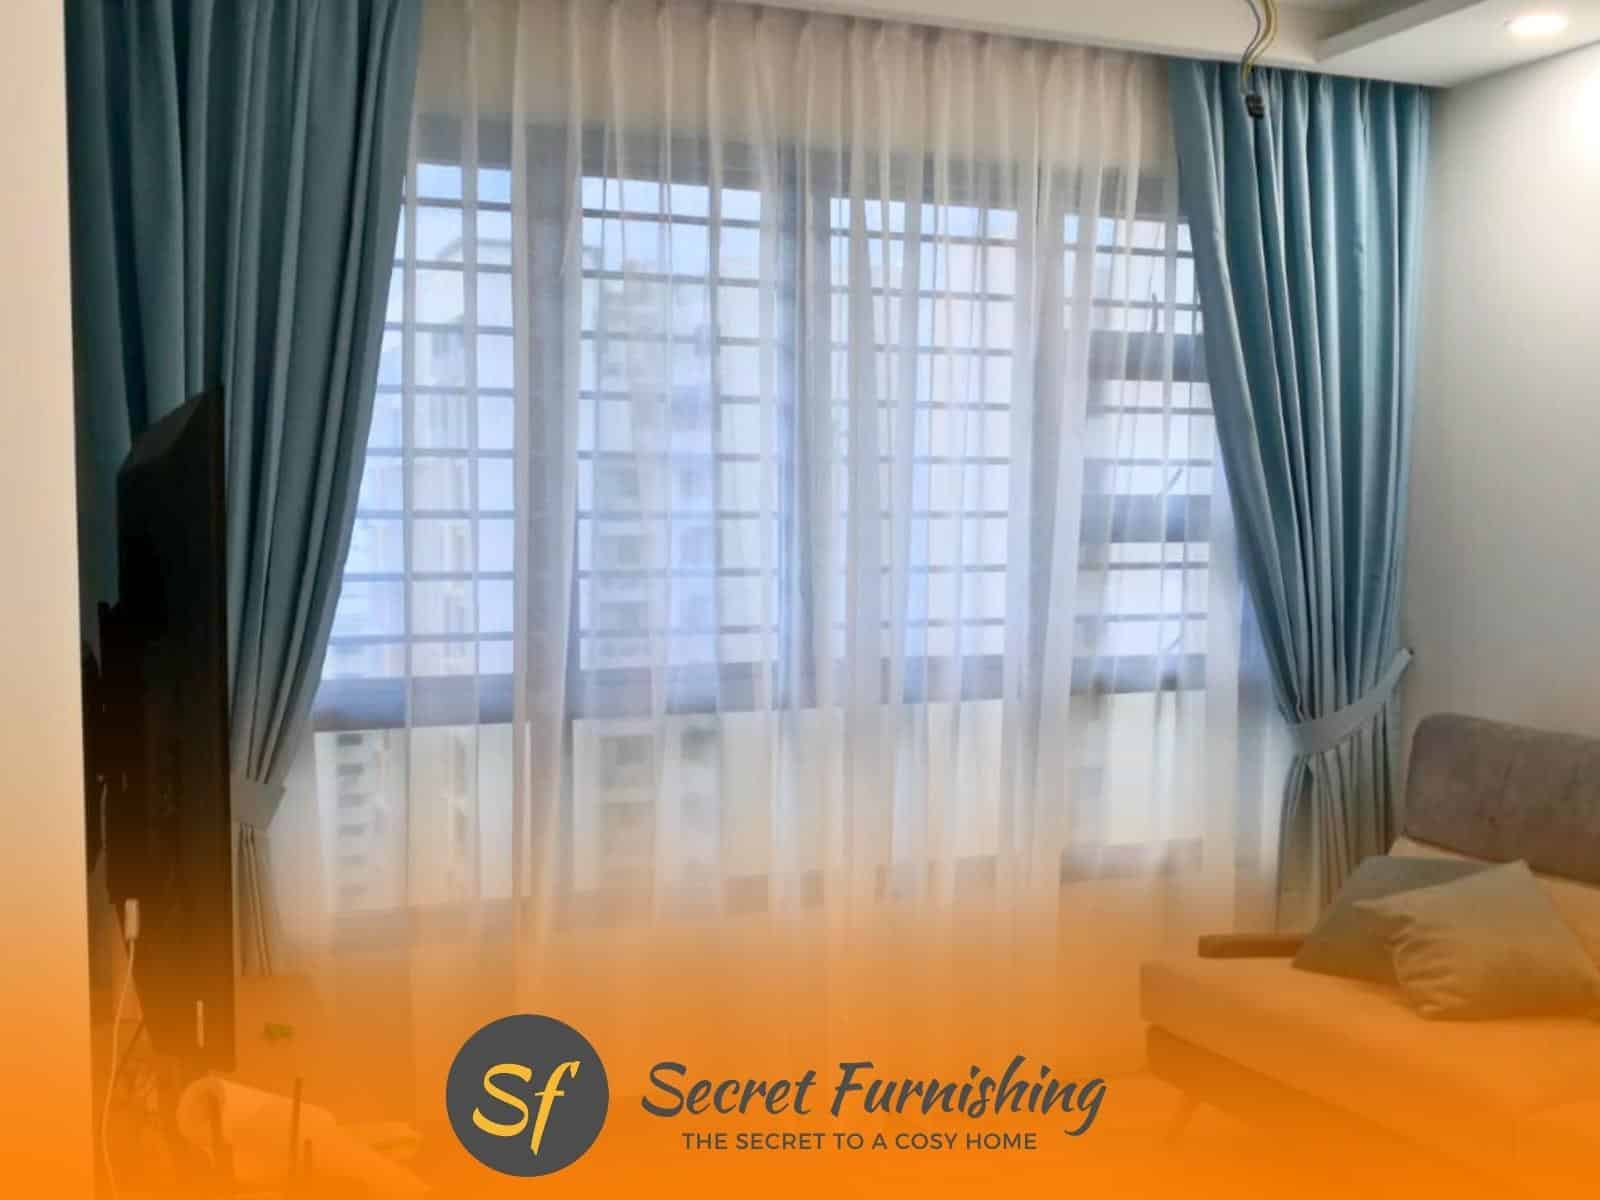 Soundproofing solutions with curtains